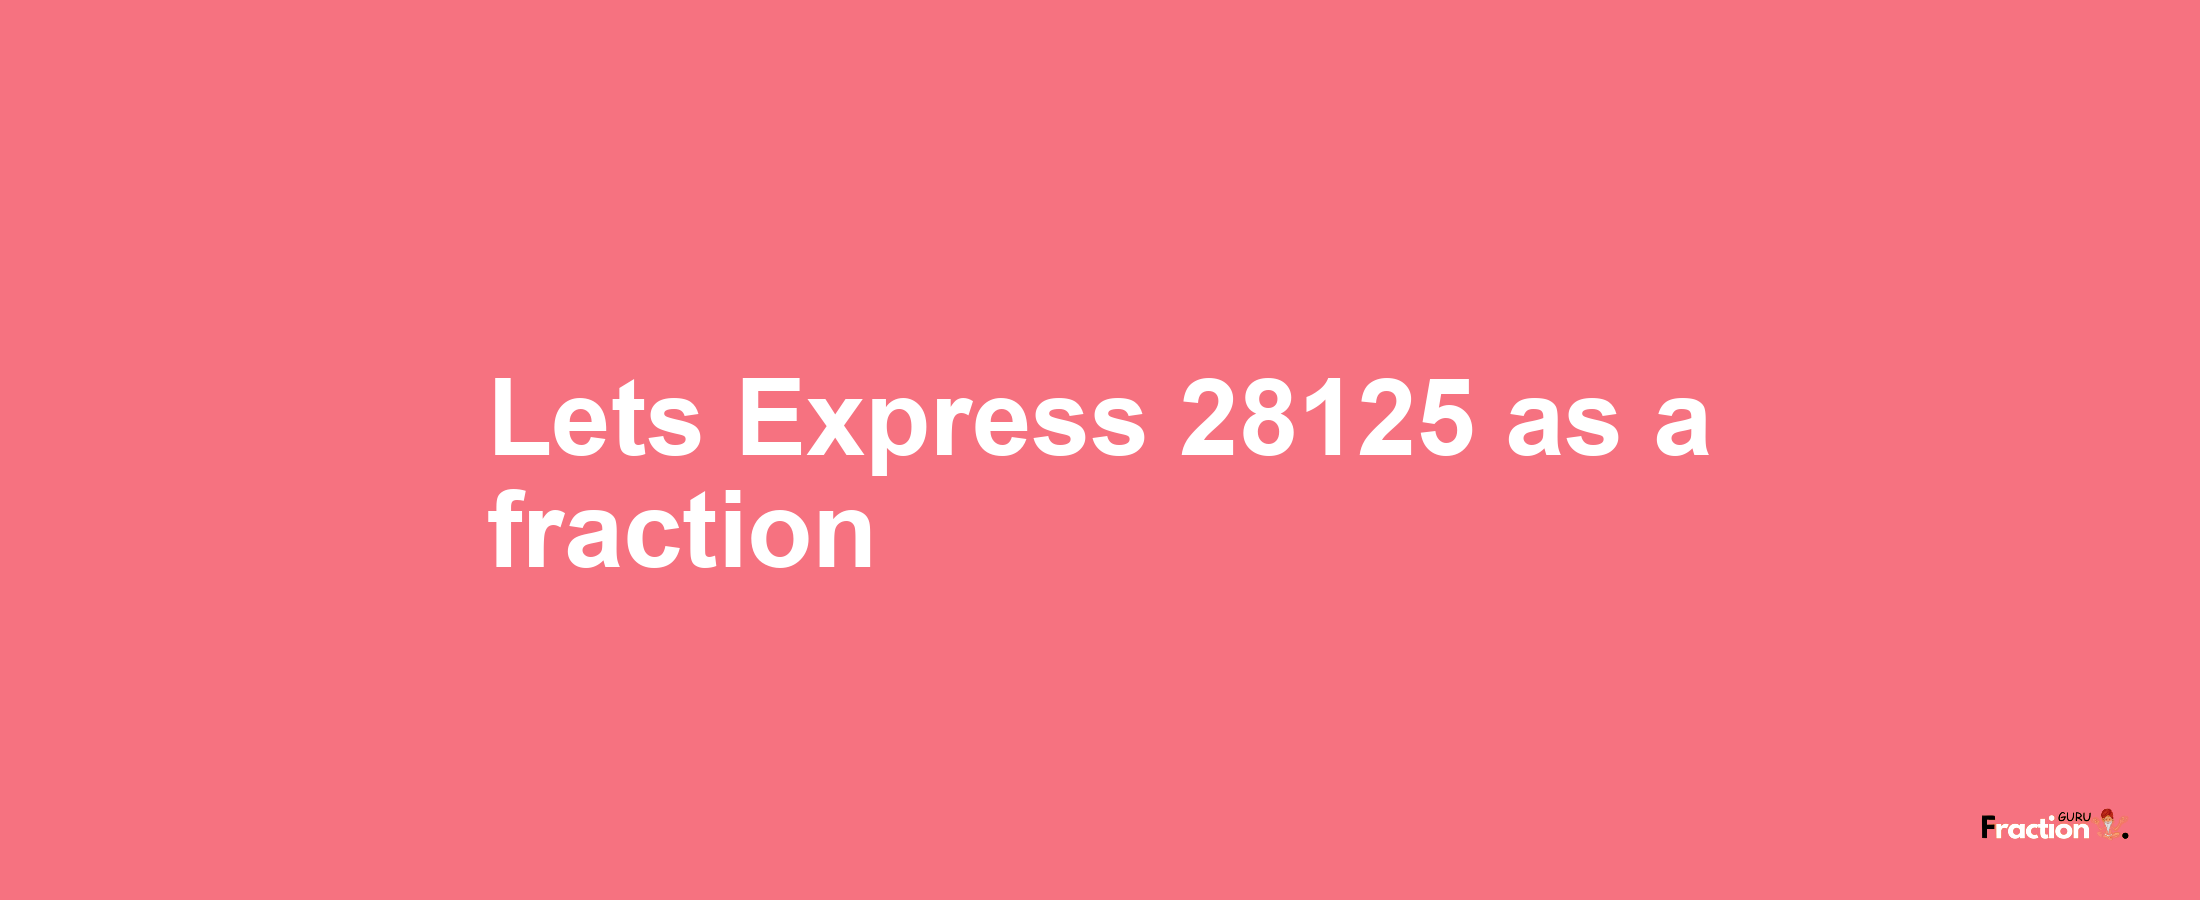 Lets Express 28125 as afraction